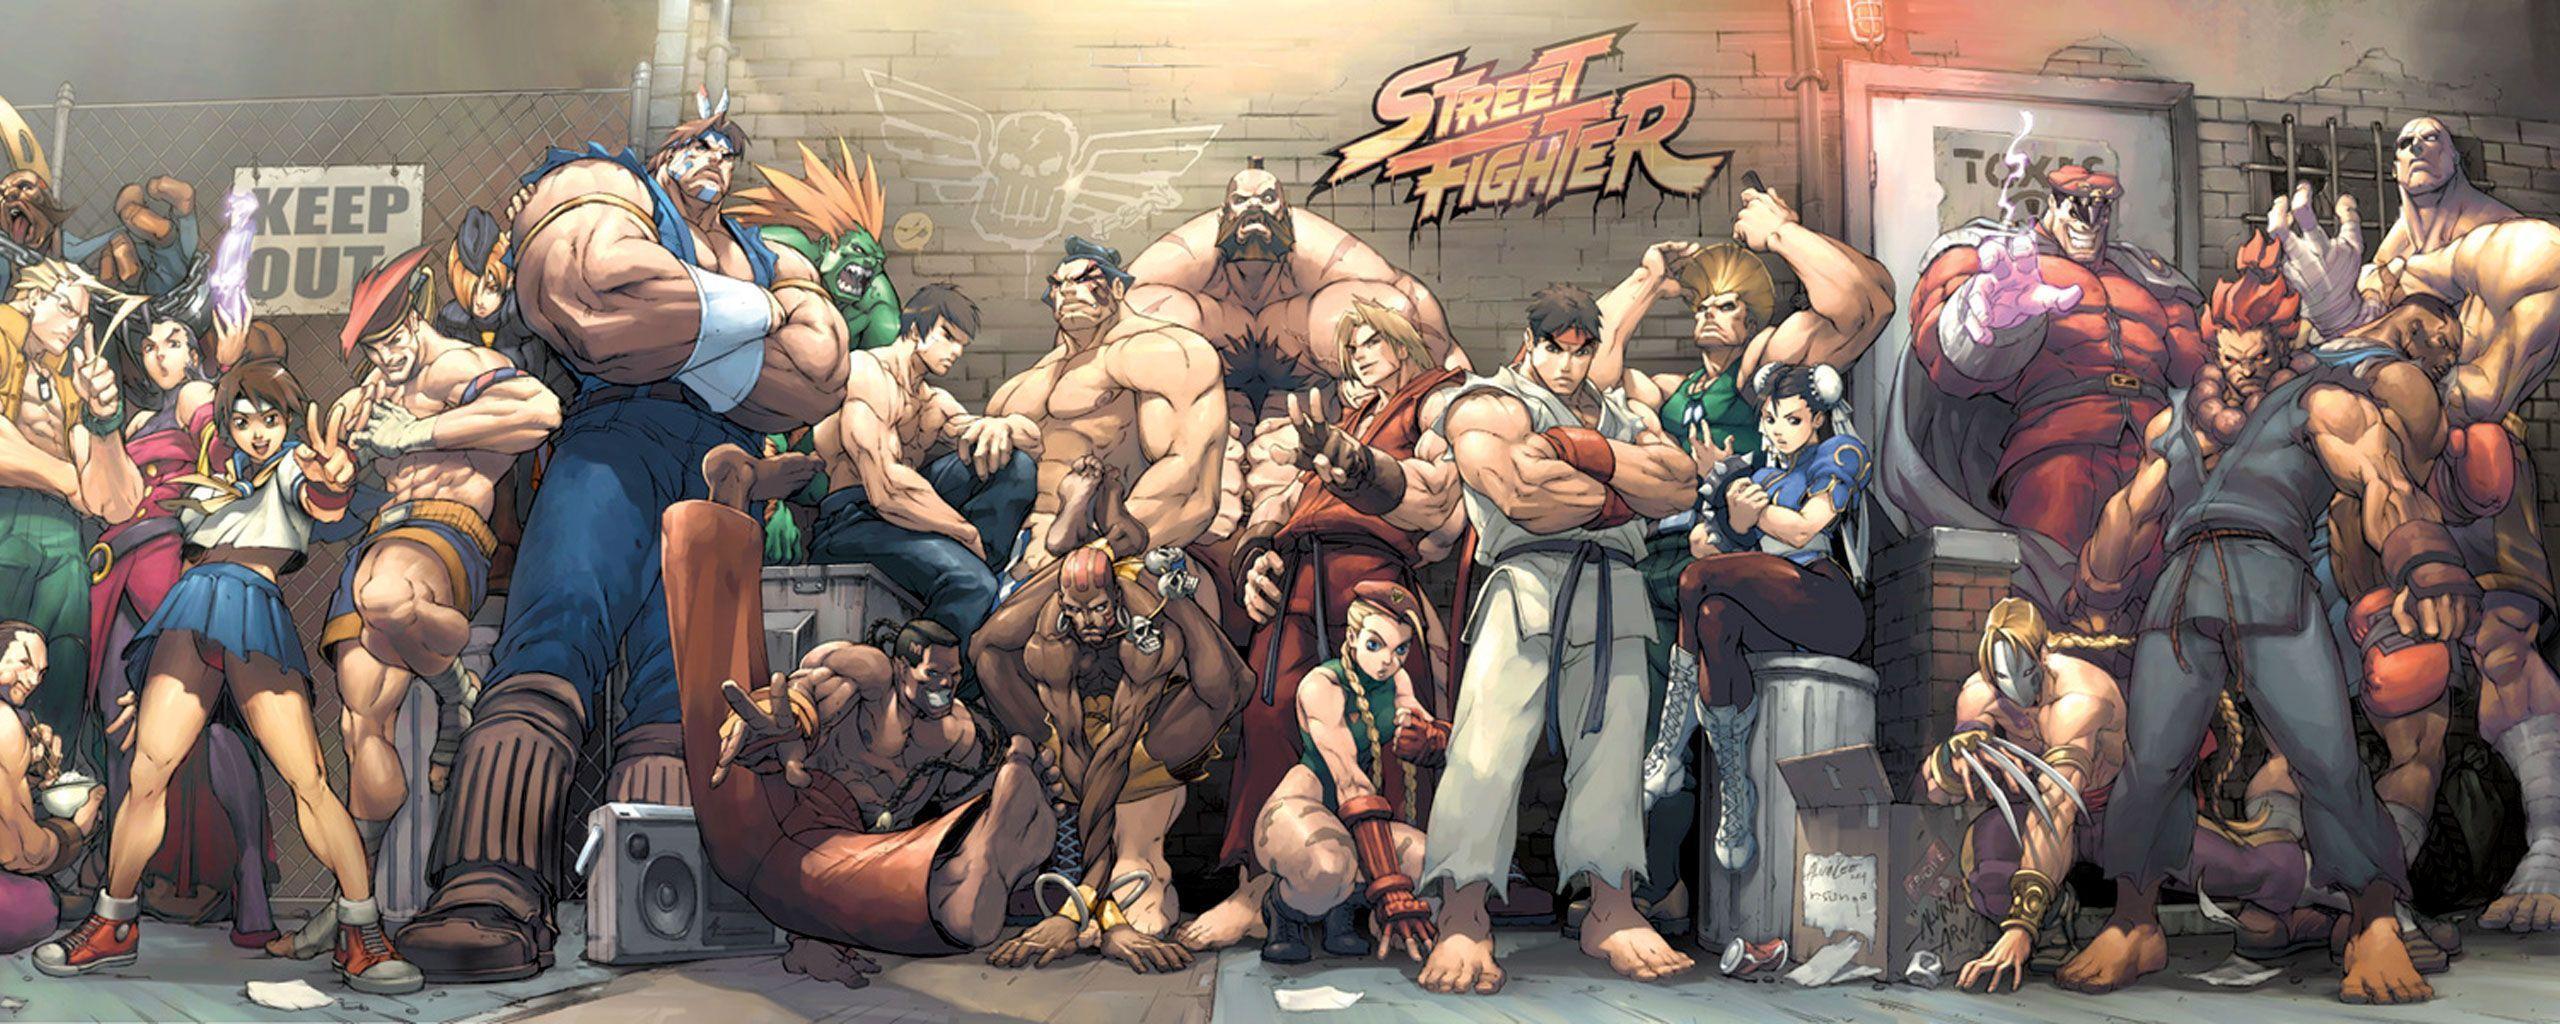 Free download Street Fighter HD Wallpapers [2560x1024] for your Desktop